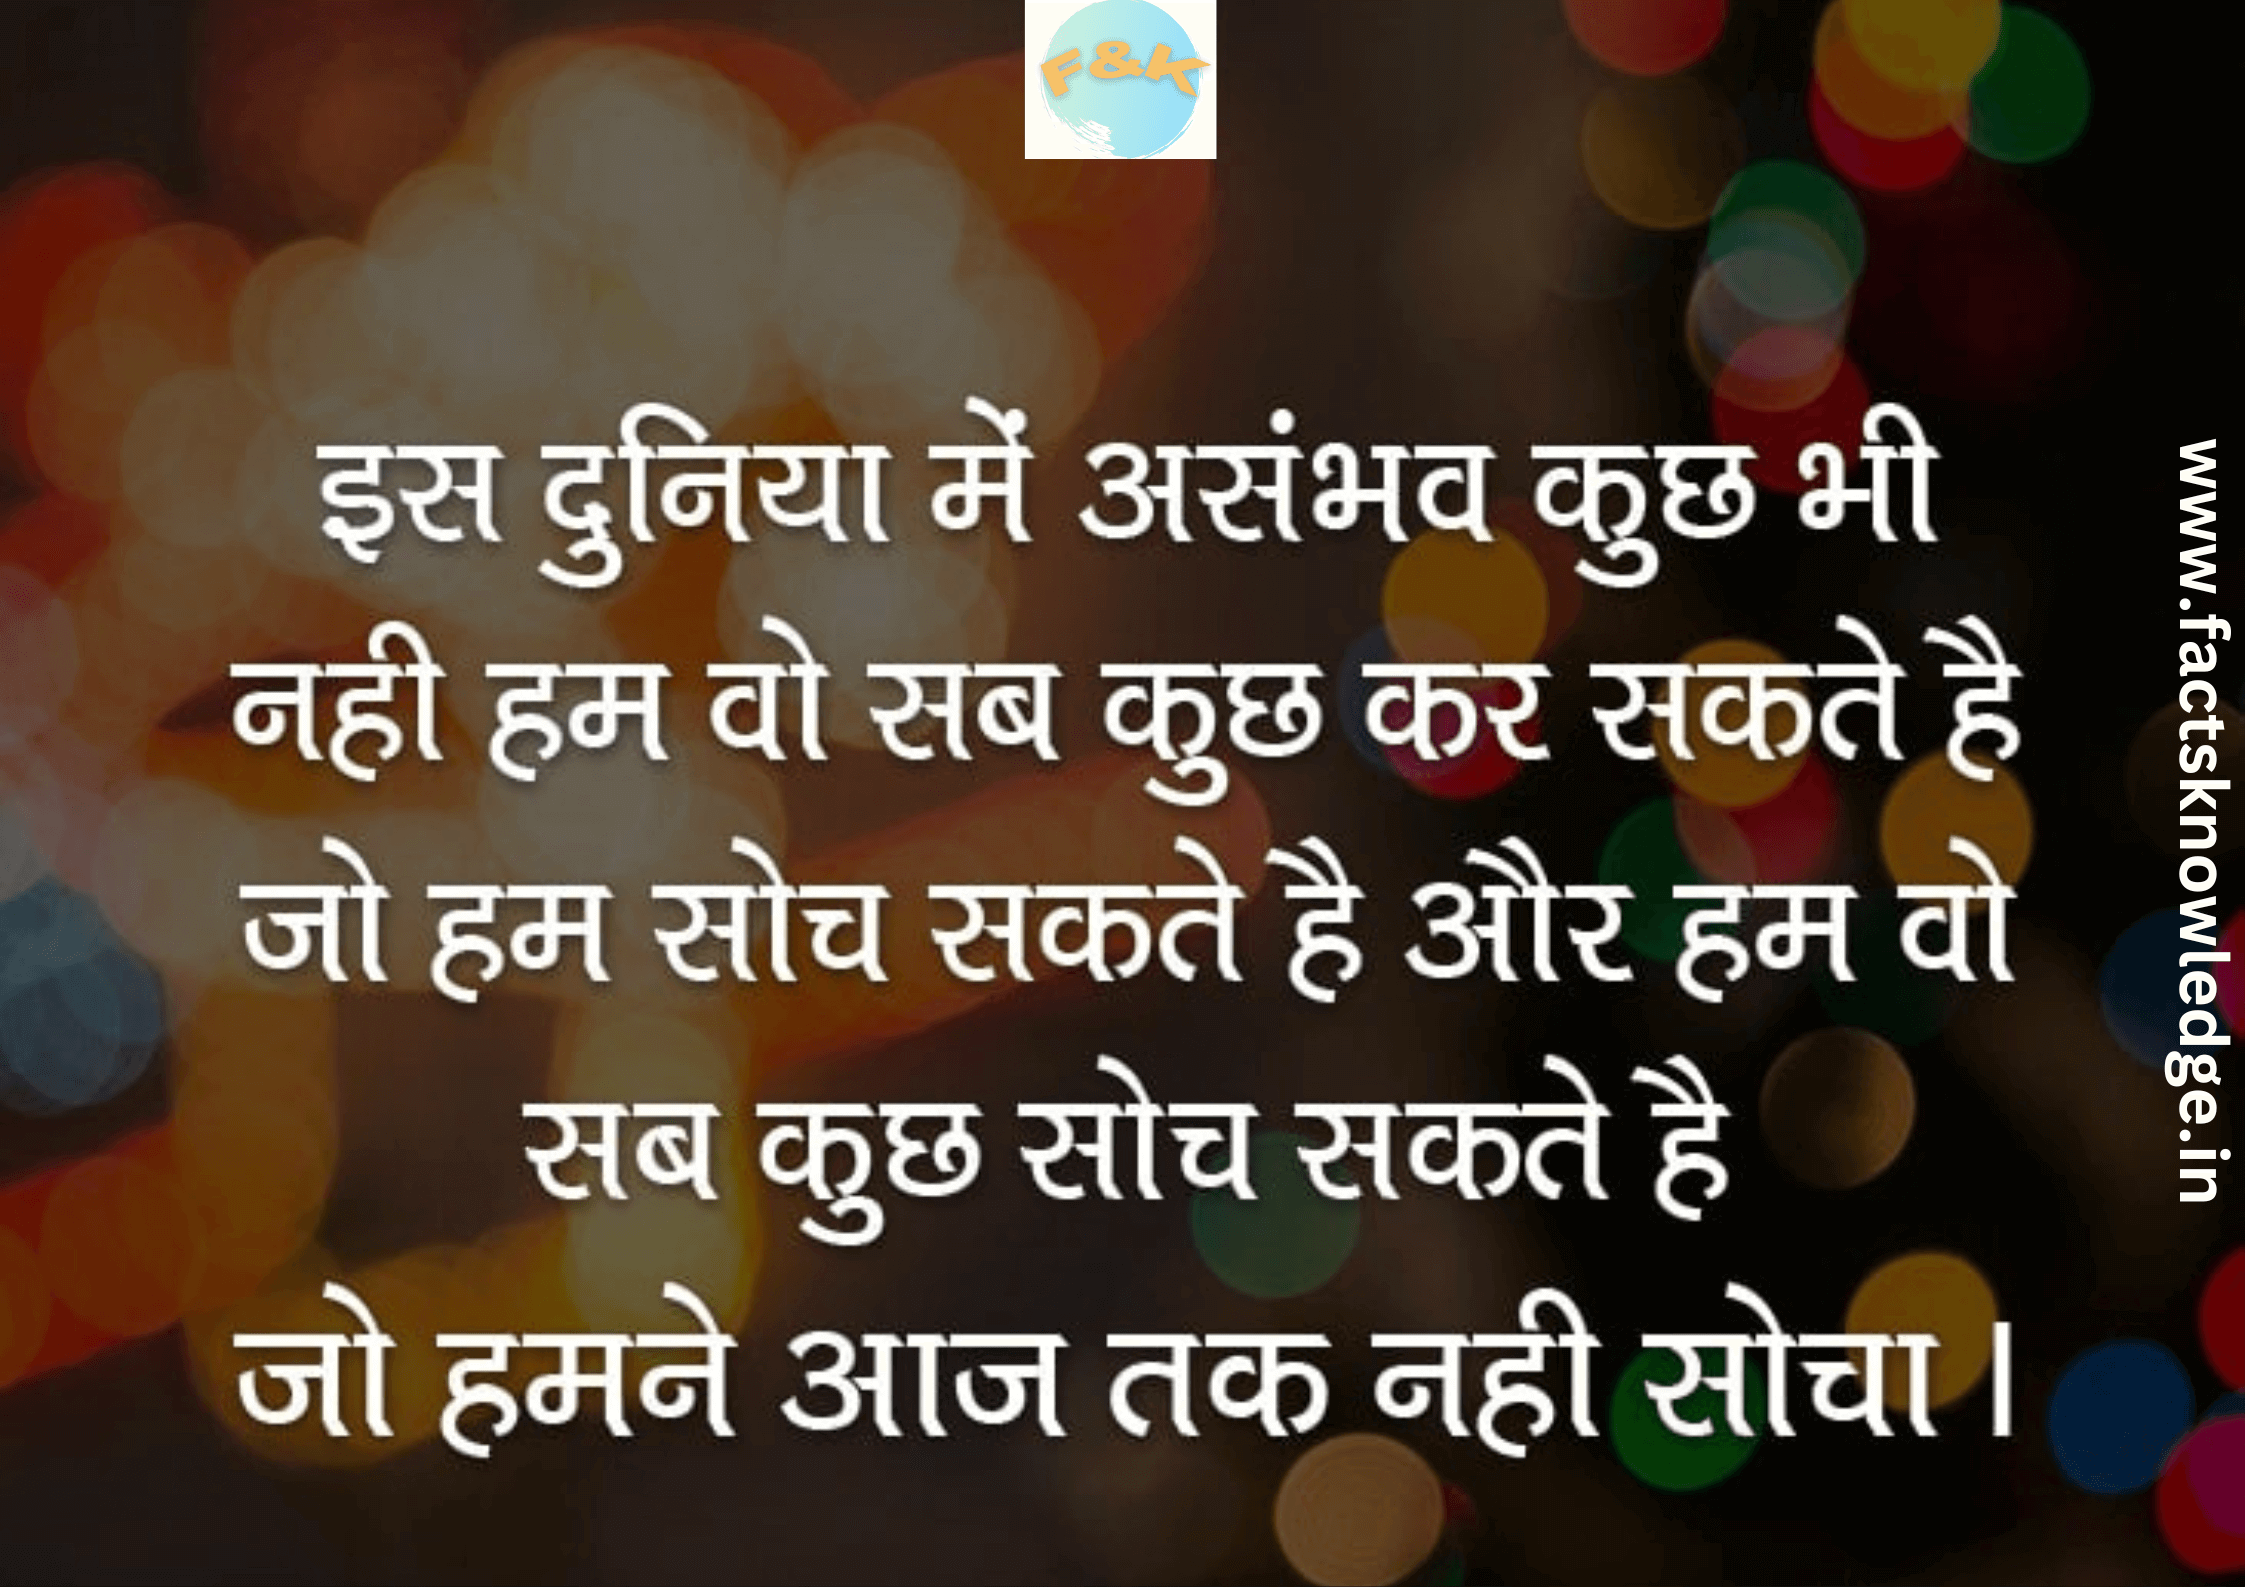 सुविचार | Thought of the Day in Hindi | best motivational success status in Hindi | best quote of the day images | images on hindi status | Motivational Morning Thoughts In Hindi With Images